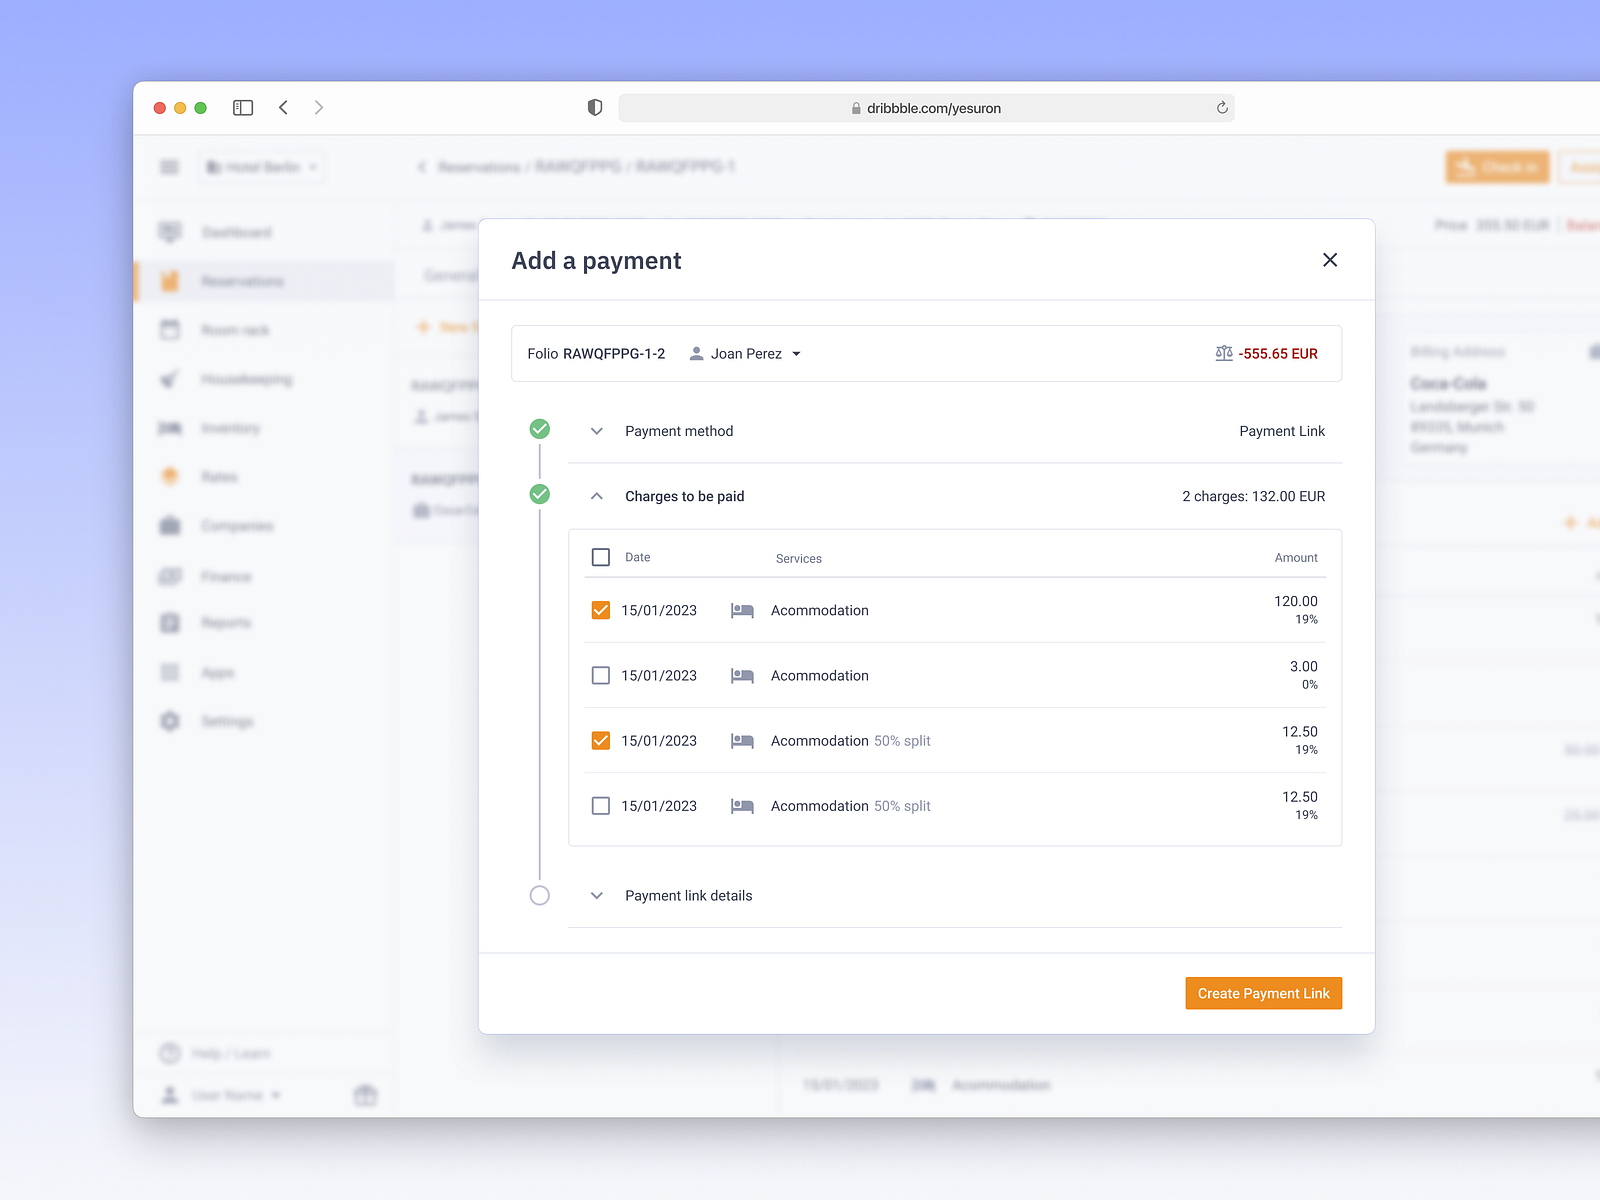 add-a-payment-in-apaleo-s-app-by-gabriel-yesuron-on-dribbble